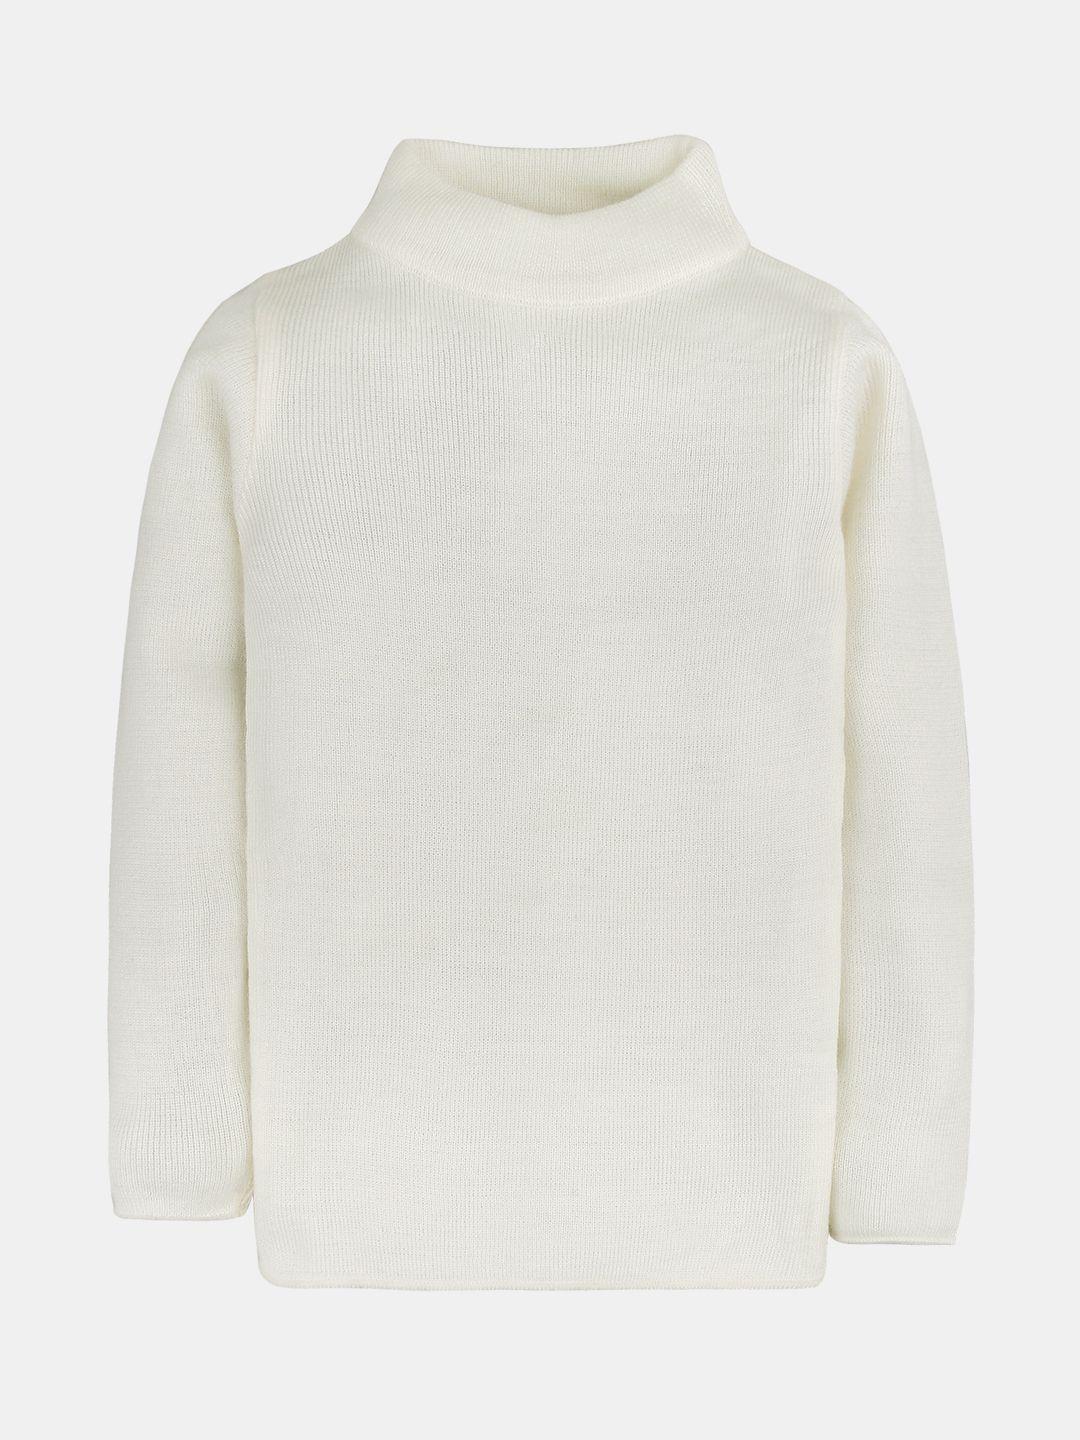 rvk kids off-white solid sweater